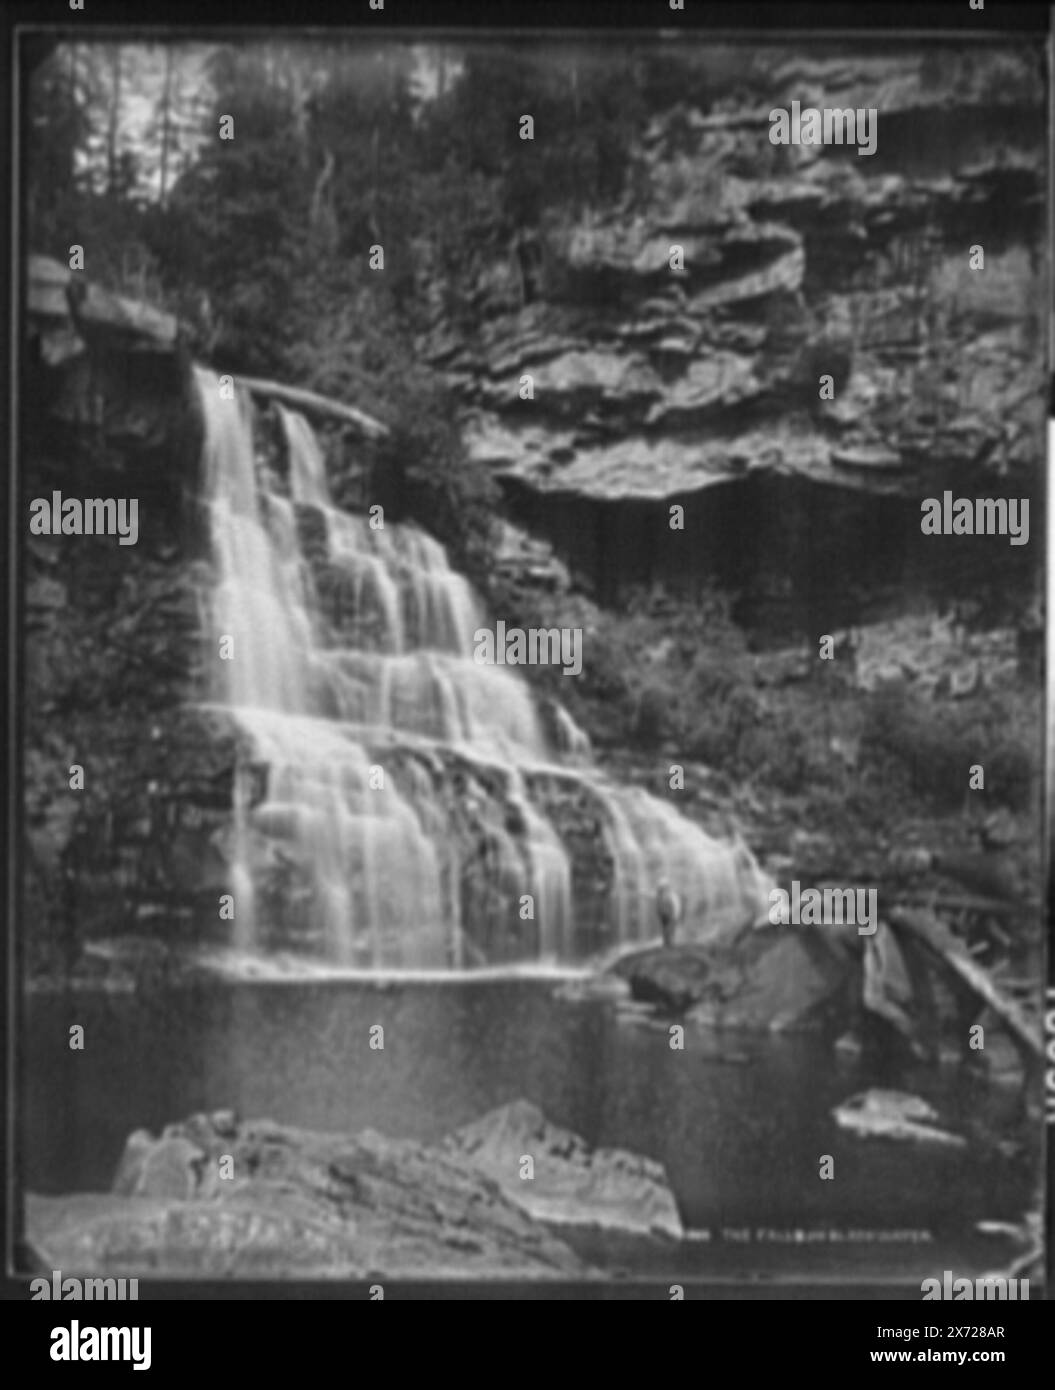 The falls of the Blackwater, Negatives form a three-part panorama., Negatives similar to LC-D43-1807., Listed in Detroit Publishing Co. negative log as no. 6114., '128 B' and '1805 center' on center negative; '01805' and 'right' on right negative., Right negative jacket title: 'The big falls, the Blackwater, West Va.', Commissioned by Baltimore & Ohio Railroad., Detroit Publishing Co. no. 01805., Detroit Publishing Co. panorama no. 06114., Gift; State Historical Society of Colorado; 1949,  Waterfalls. , Rivers. , United States, West Virginia, Blackwater River. , United States, West Virginia, D Stock Photo